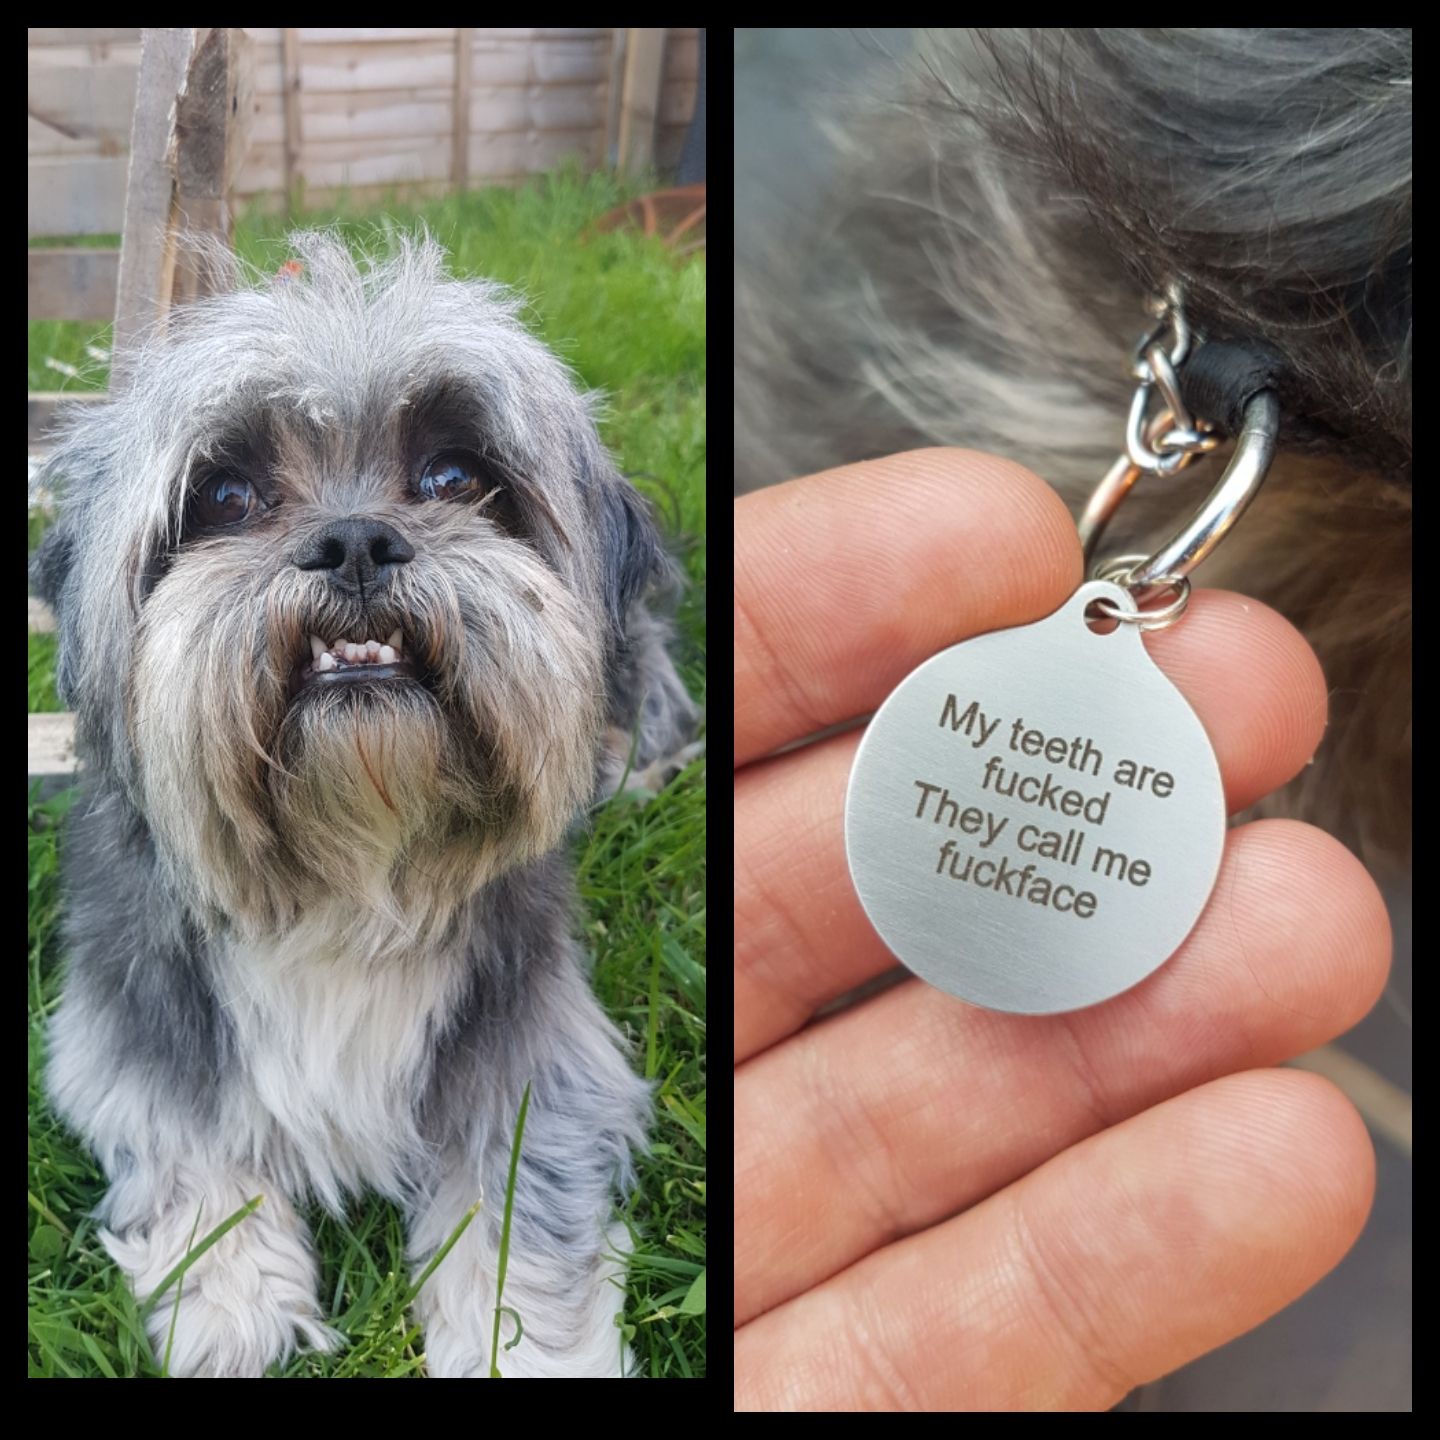 Girlfriend's dad thought he would treat his daughters dog to a new name tag.